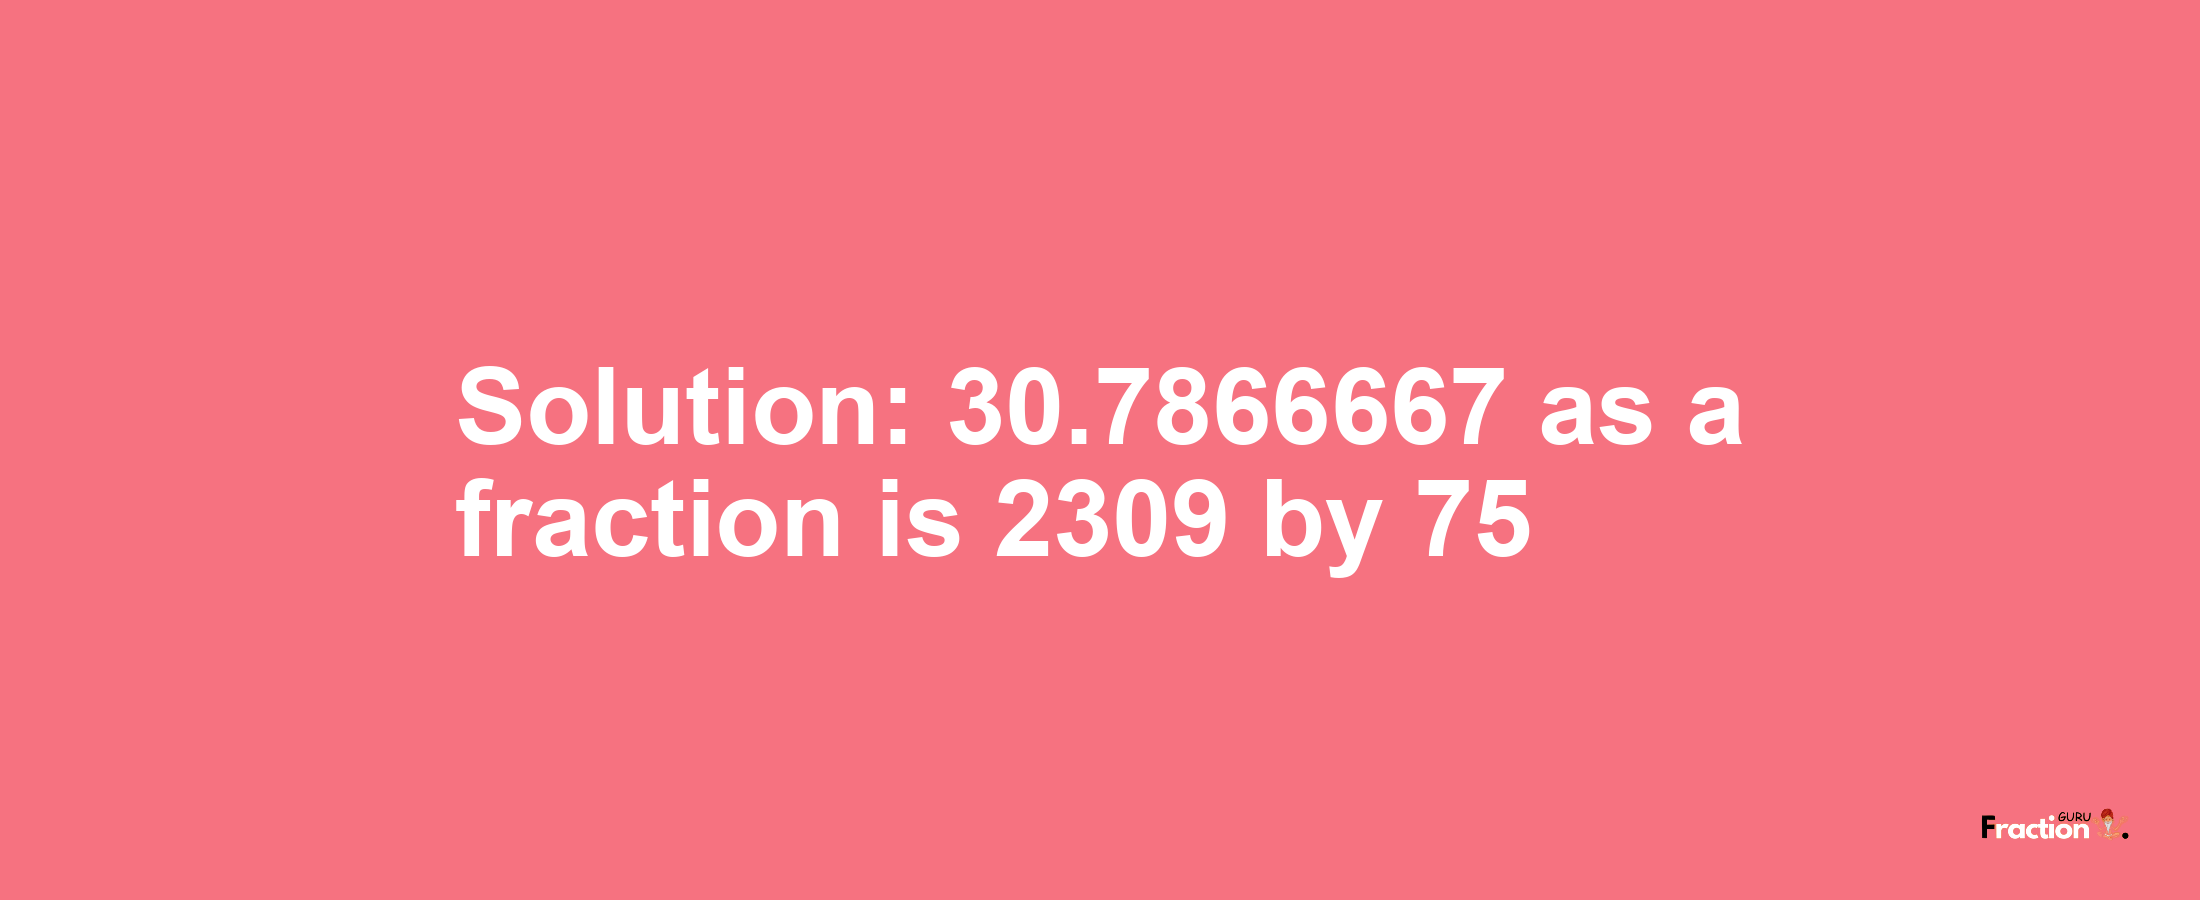 Solution:30.7866667 as a fraction is 2309/75